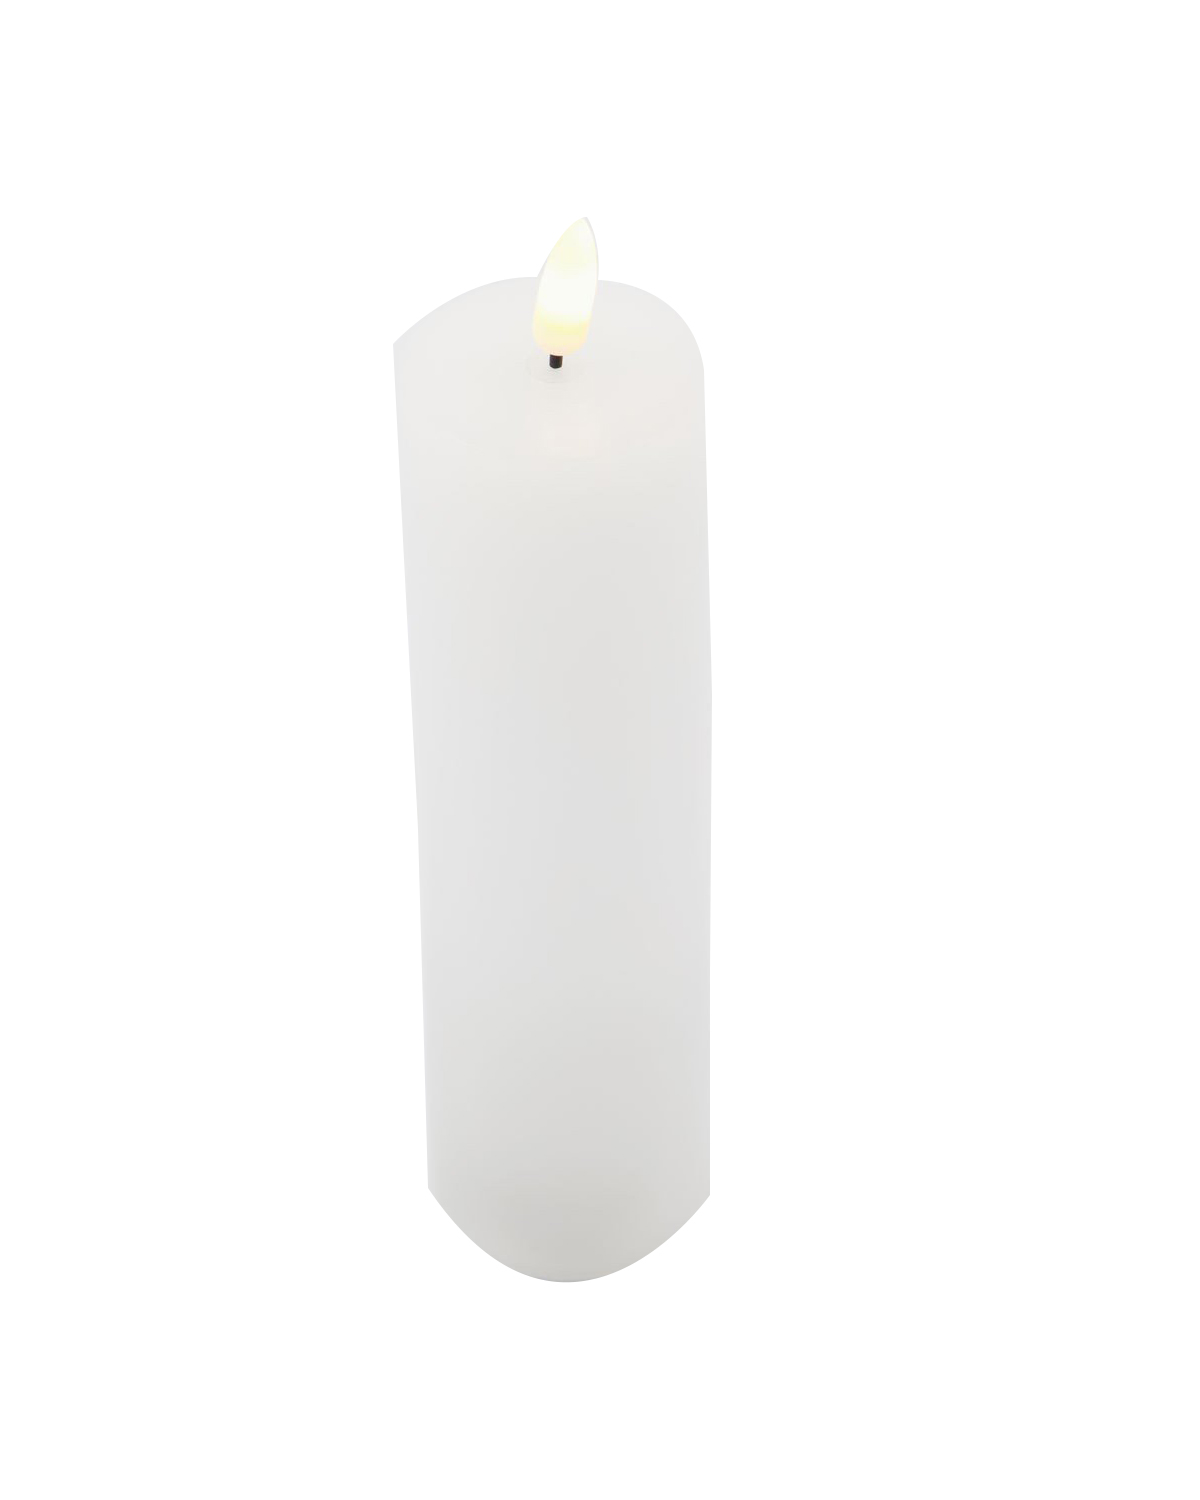 House Doctor - LED Candle , White h: 17.5 cm, dia: 5 cm (210070805)